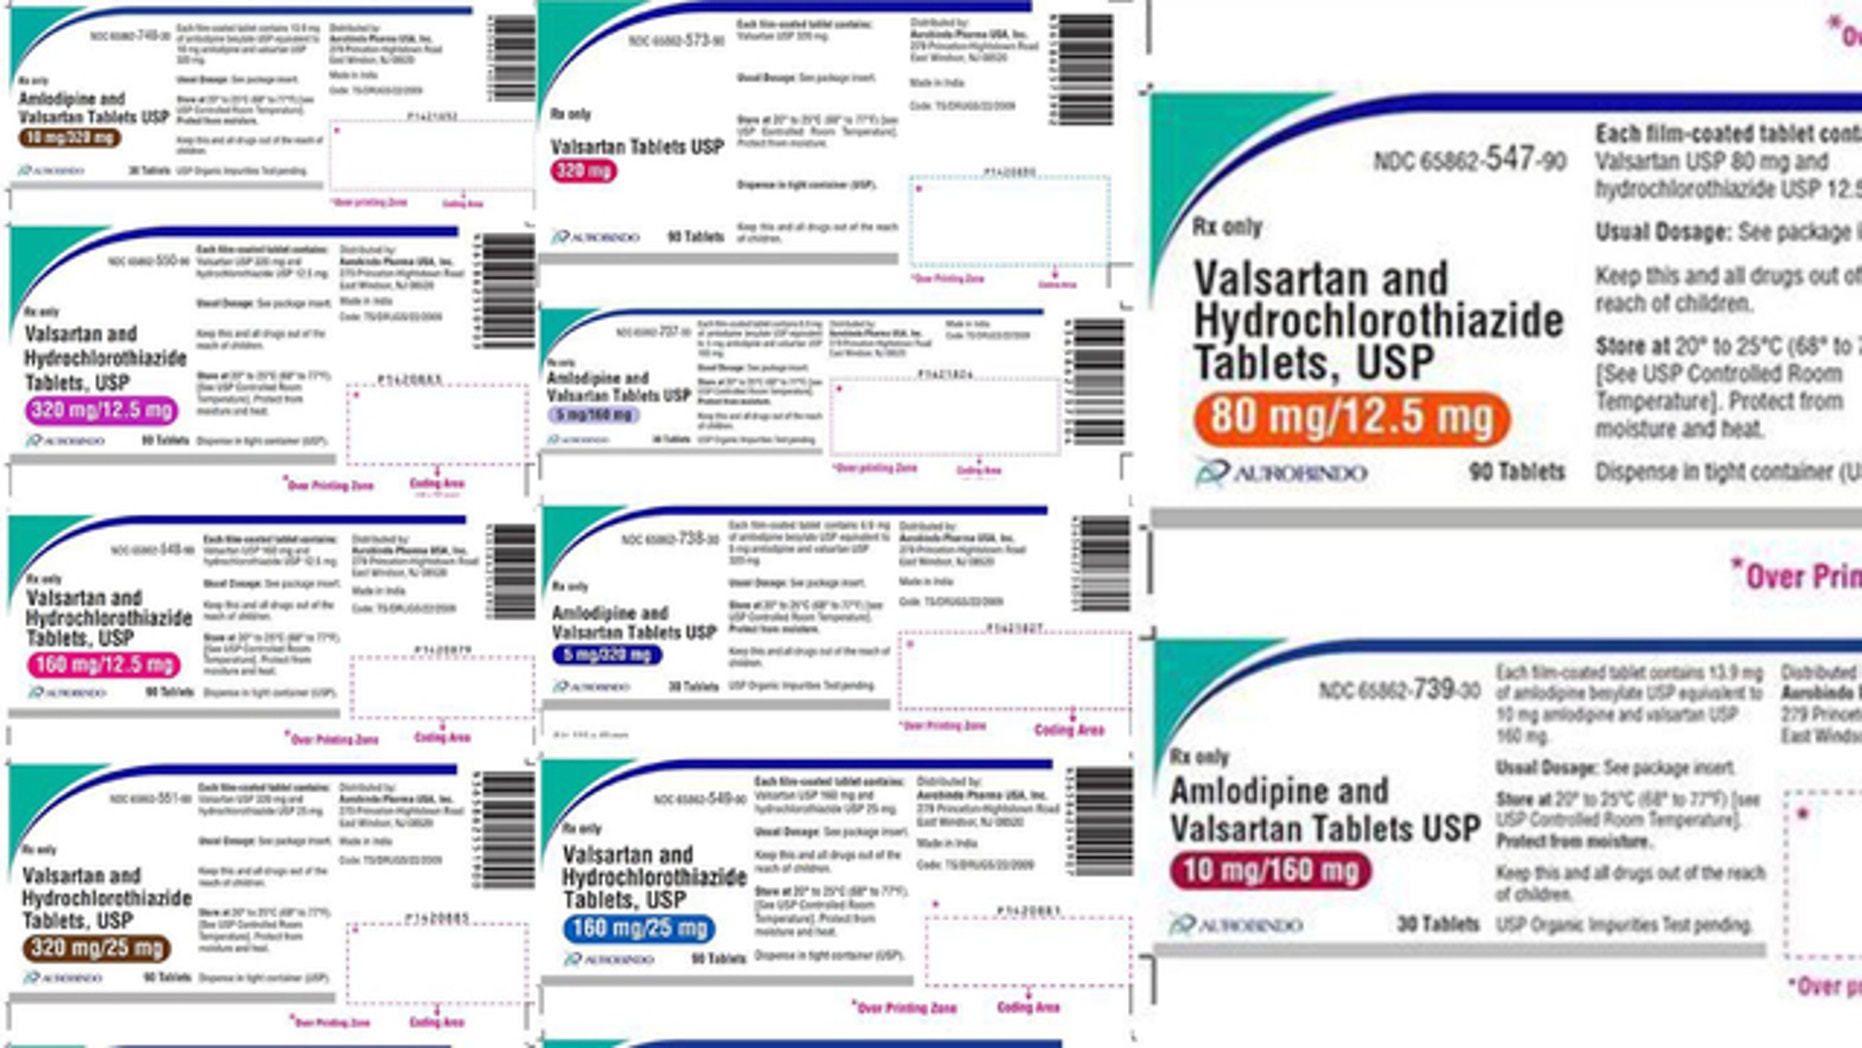 Blood pressure tablets recalled over possible cancer risk Fox News